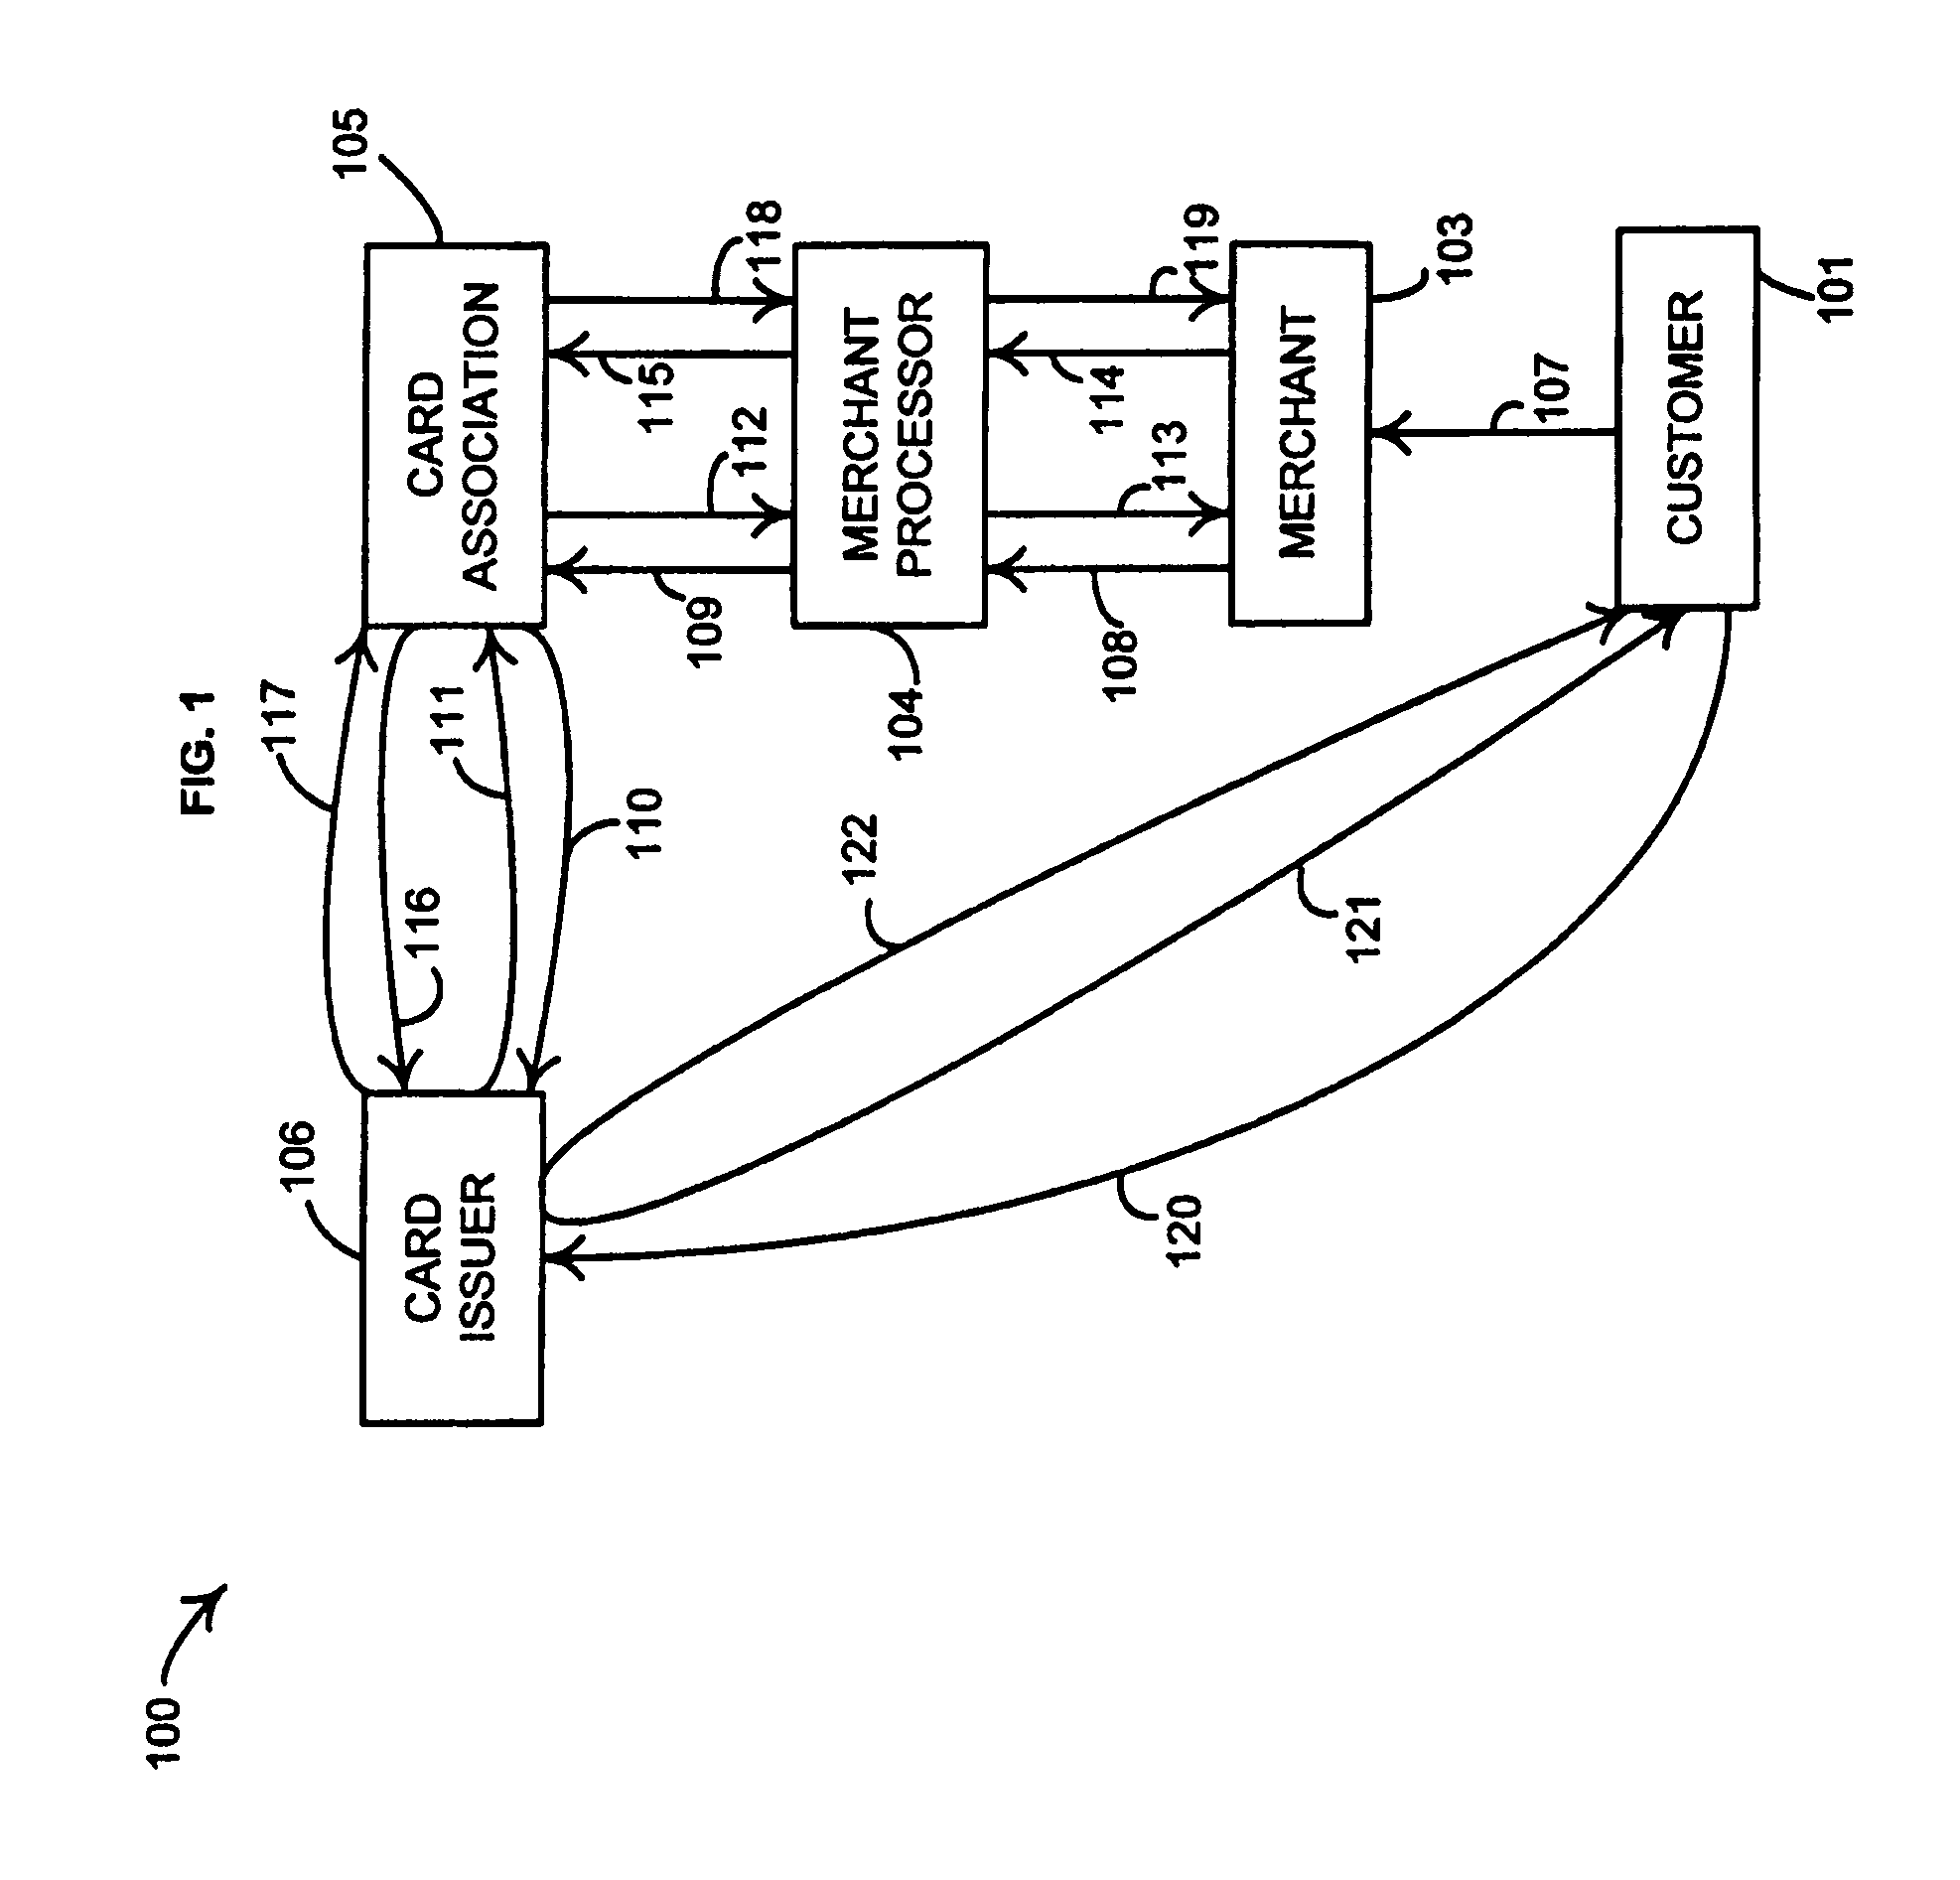 Method and system for authorizing card account transactions by geographic region